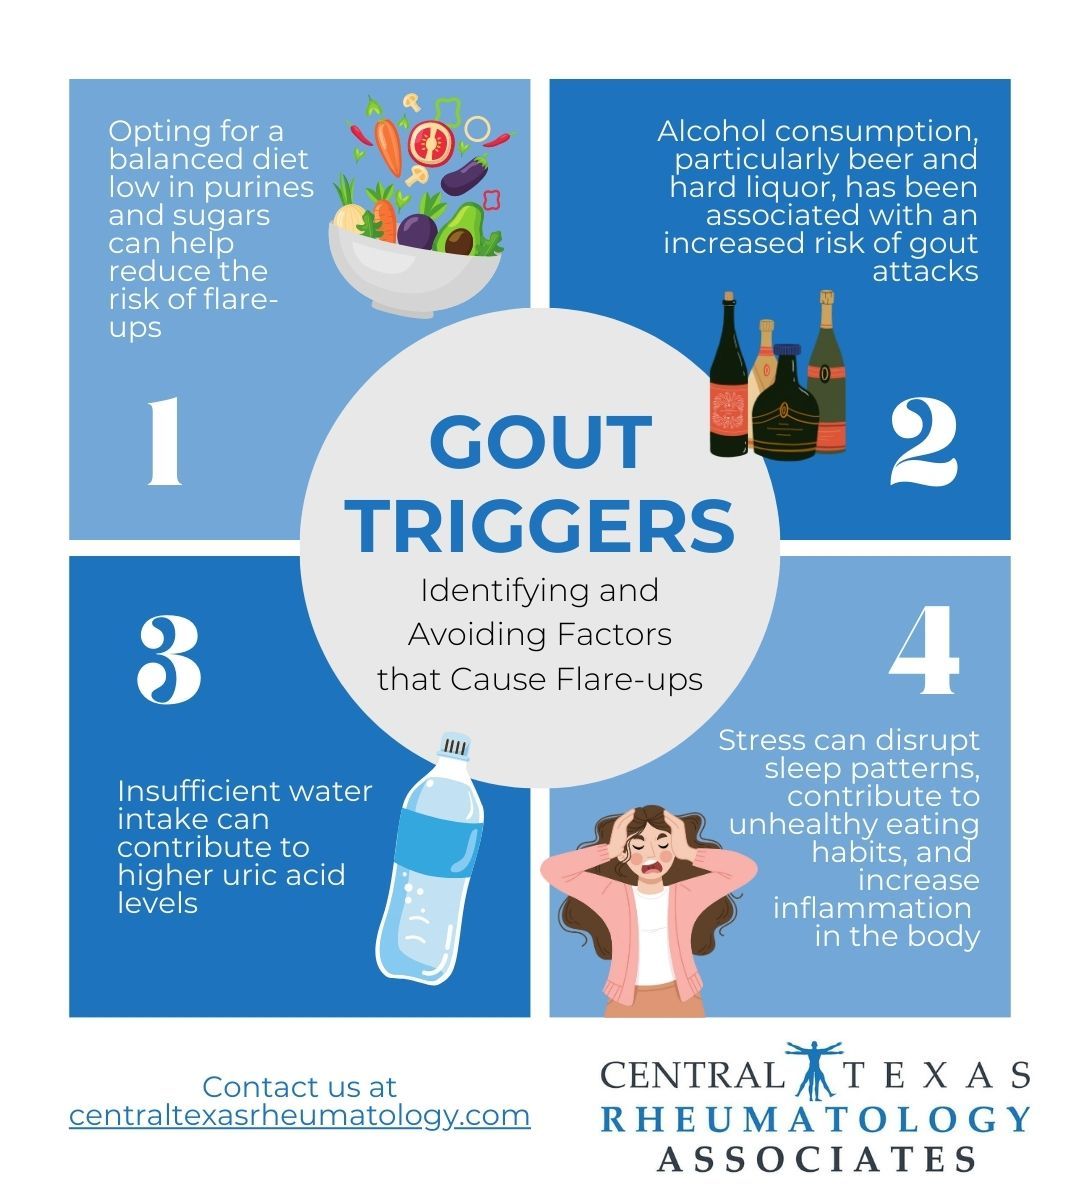 M37514 - Infographic - Gout Triggers Identifying and Avoiding Factors that Cause Flare-ups.jpg